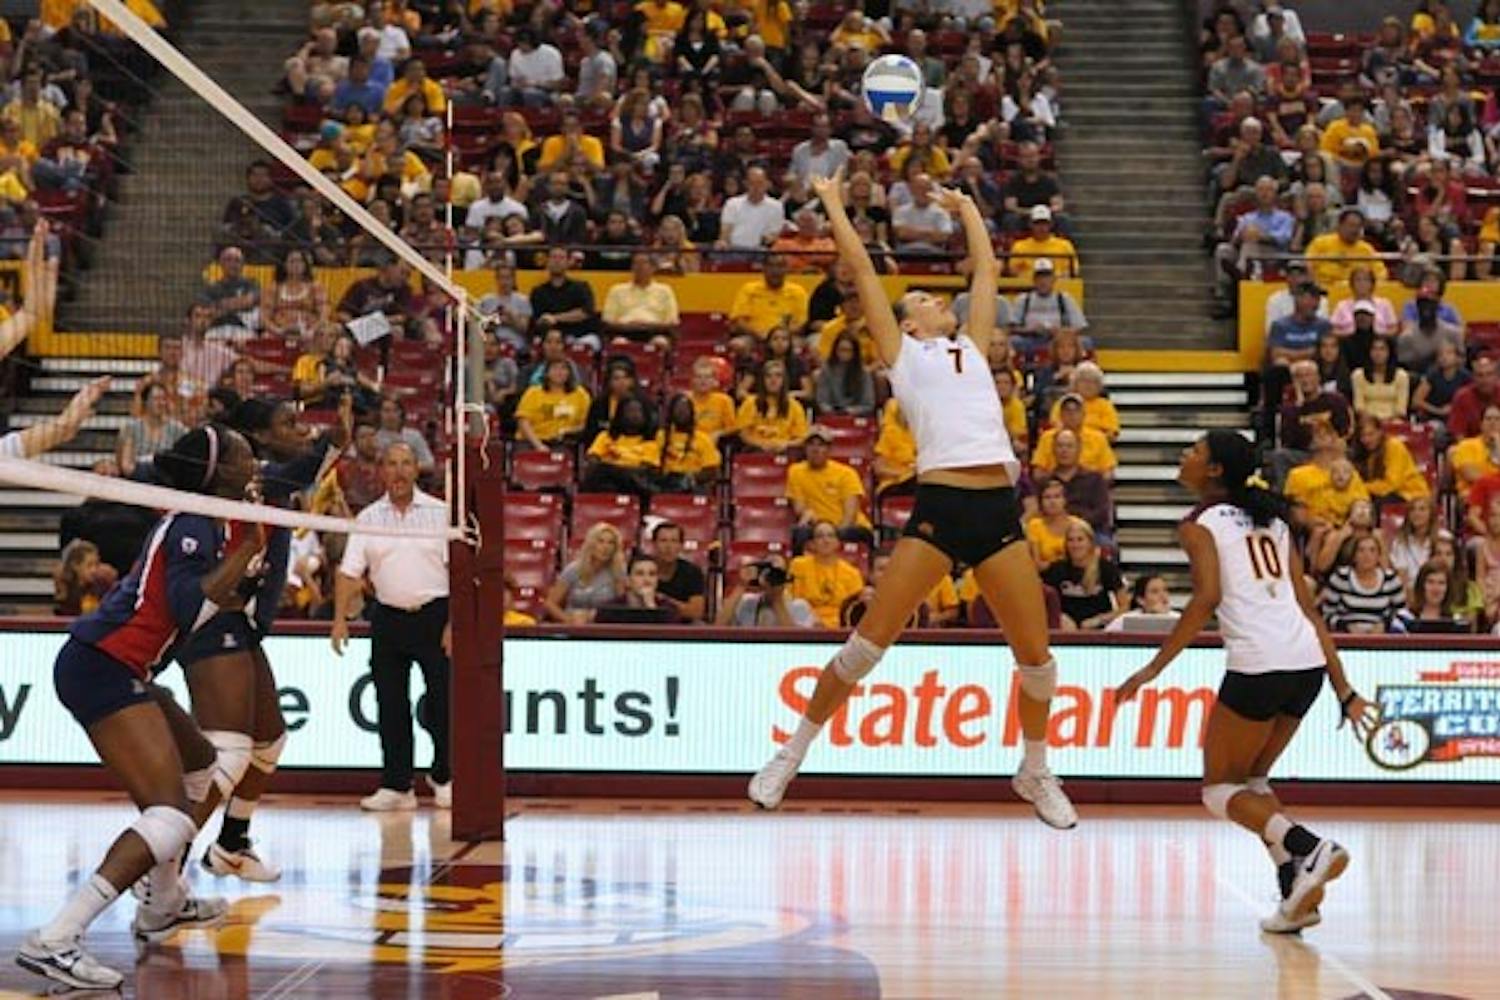 IMMINENT KILL: Junior setter Cat Highmark lofts a set as sophomore middle blocker Erica Wilson prepares for a kill. Hosting Oregon and Oregon State this weekend, the Sun Devils are looking to improve their passing game against tough Pac-10 teams. (Photo by Aaron Lavinsky)